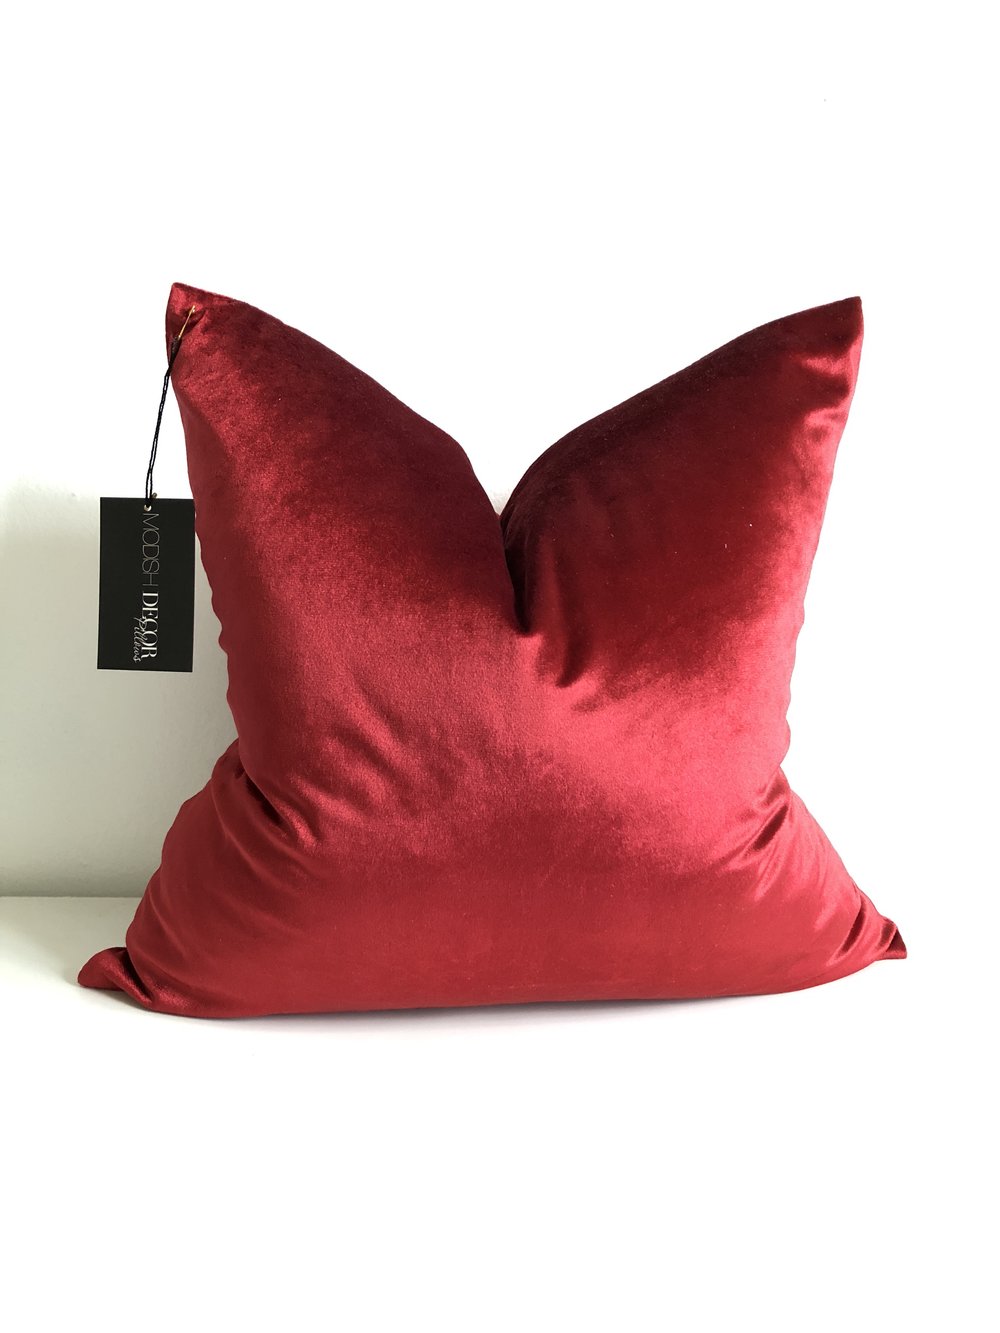 Modish Decor Pillows - Bring new life to your home + support small black business owners with our Buy Black Holiday Gift Guide. ShoptheKei.com